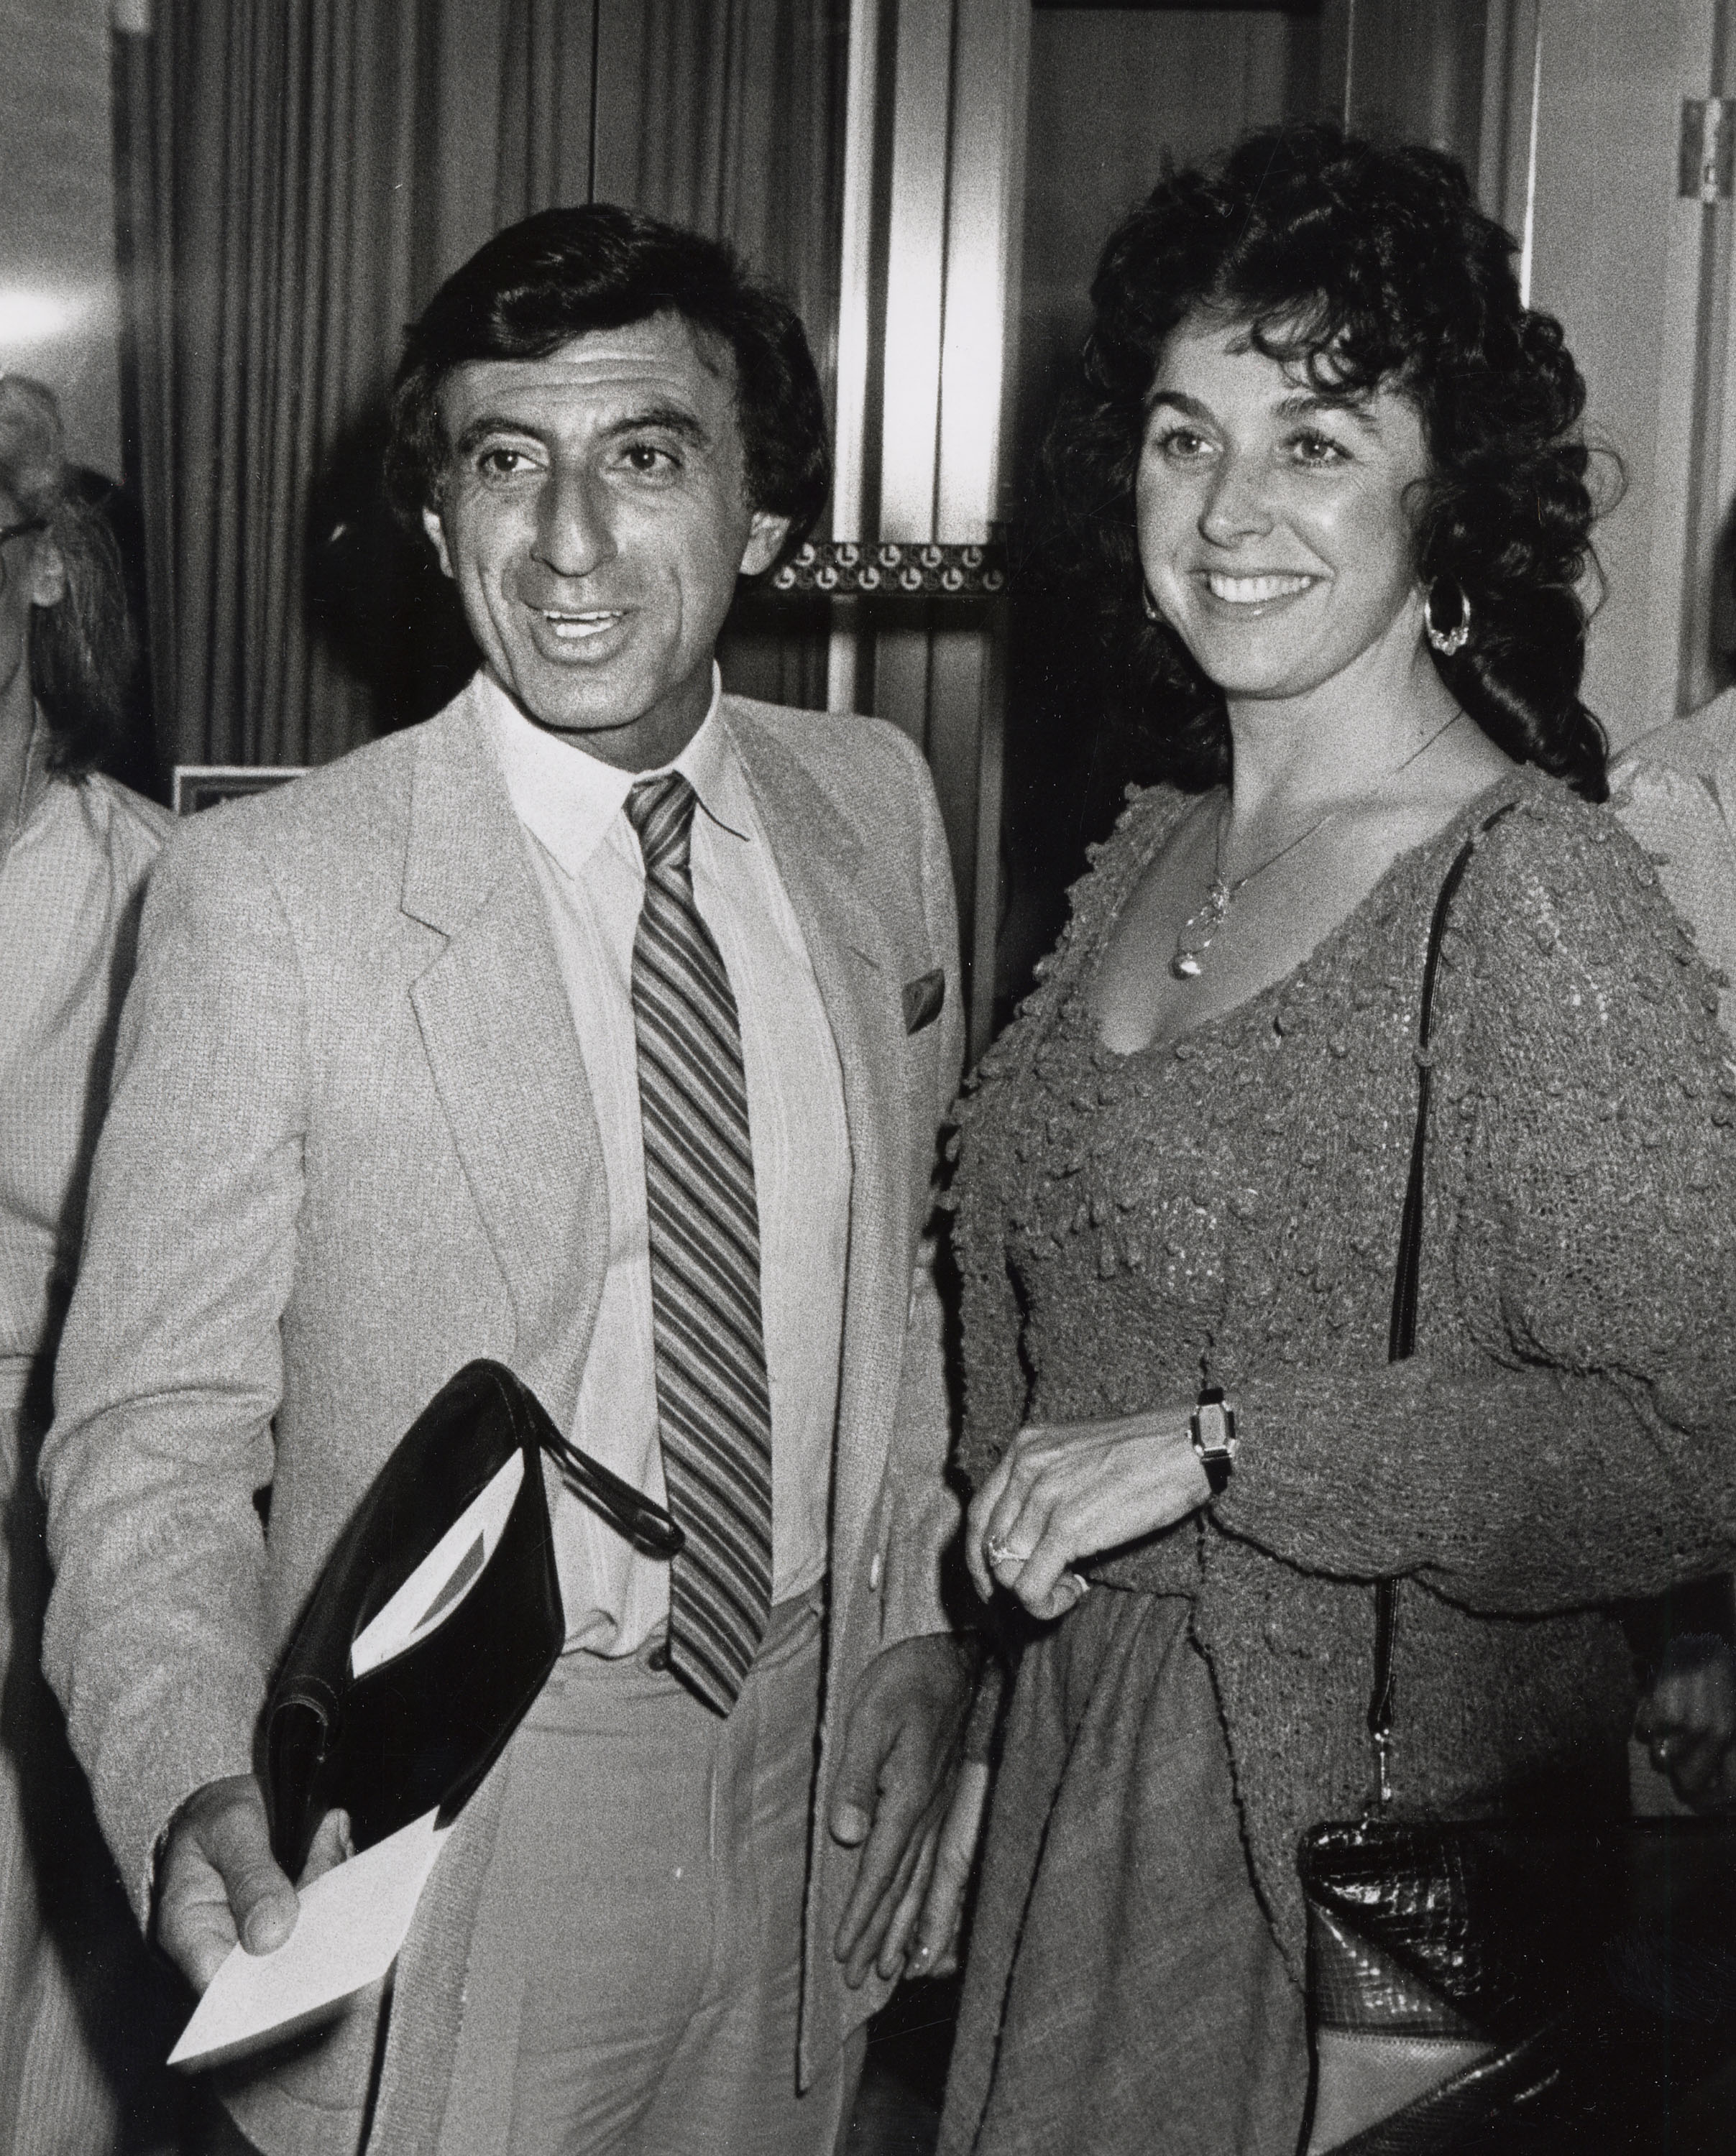 Actor Jamie Farr and wife Joy Ann Richards at the premiere of The Four Seasons on May 21, 1981 at Loew's Tower East Theater in New York City. | Source: Getty Images